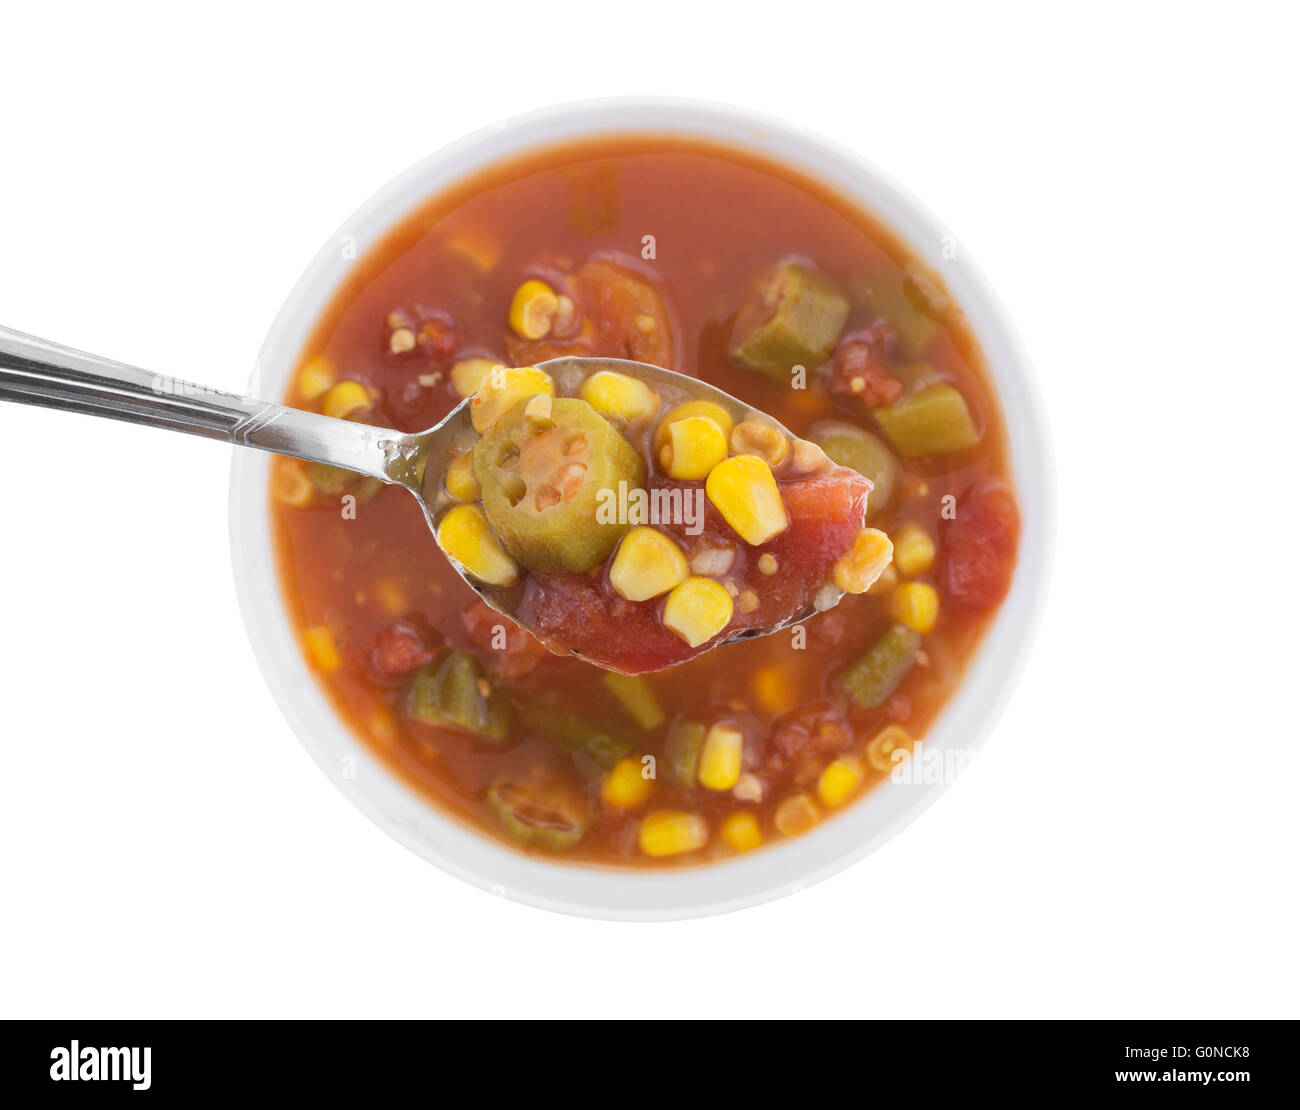 Top view of a spoonful of corn, okra and stewed tomatoes with the remainder of the vegetables in water with seasonings Stock Photo